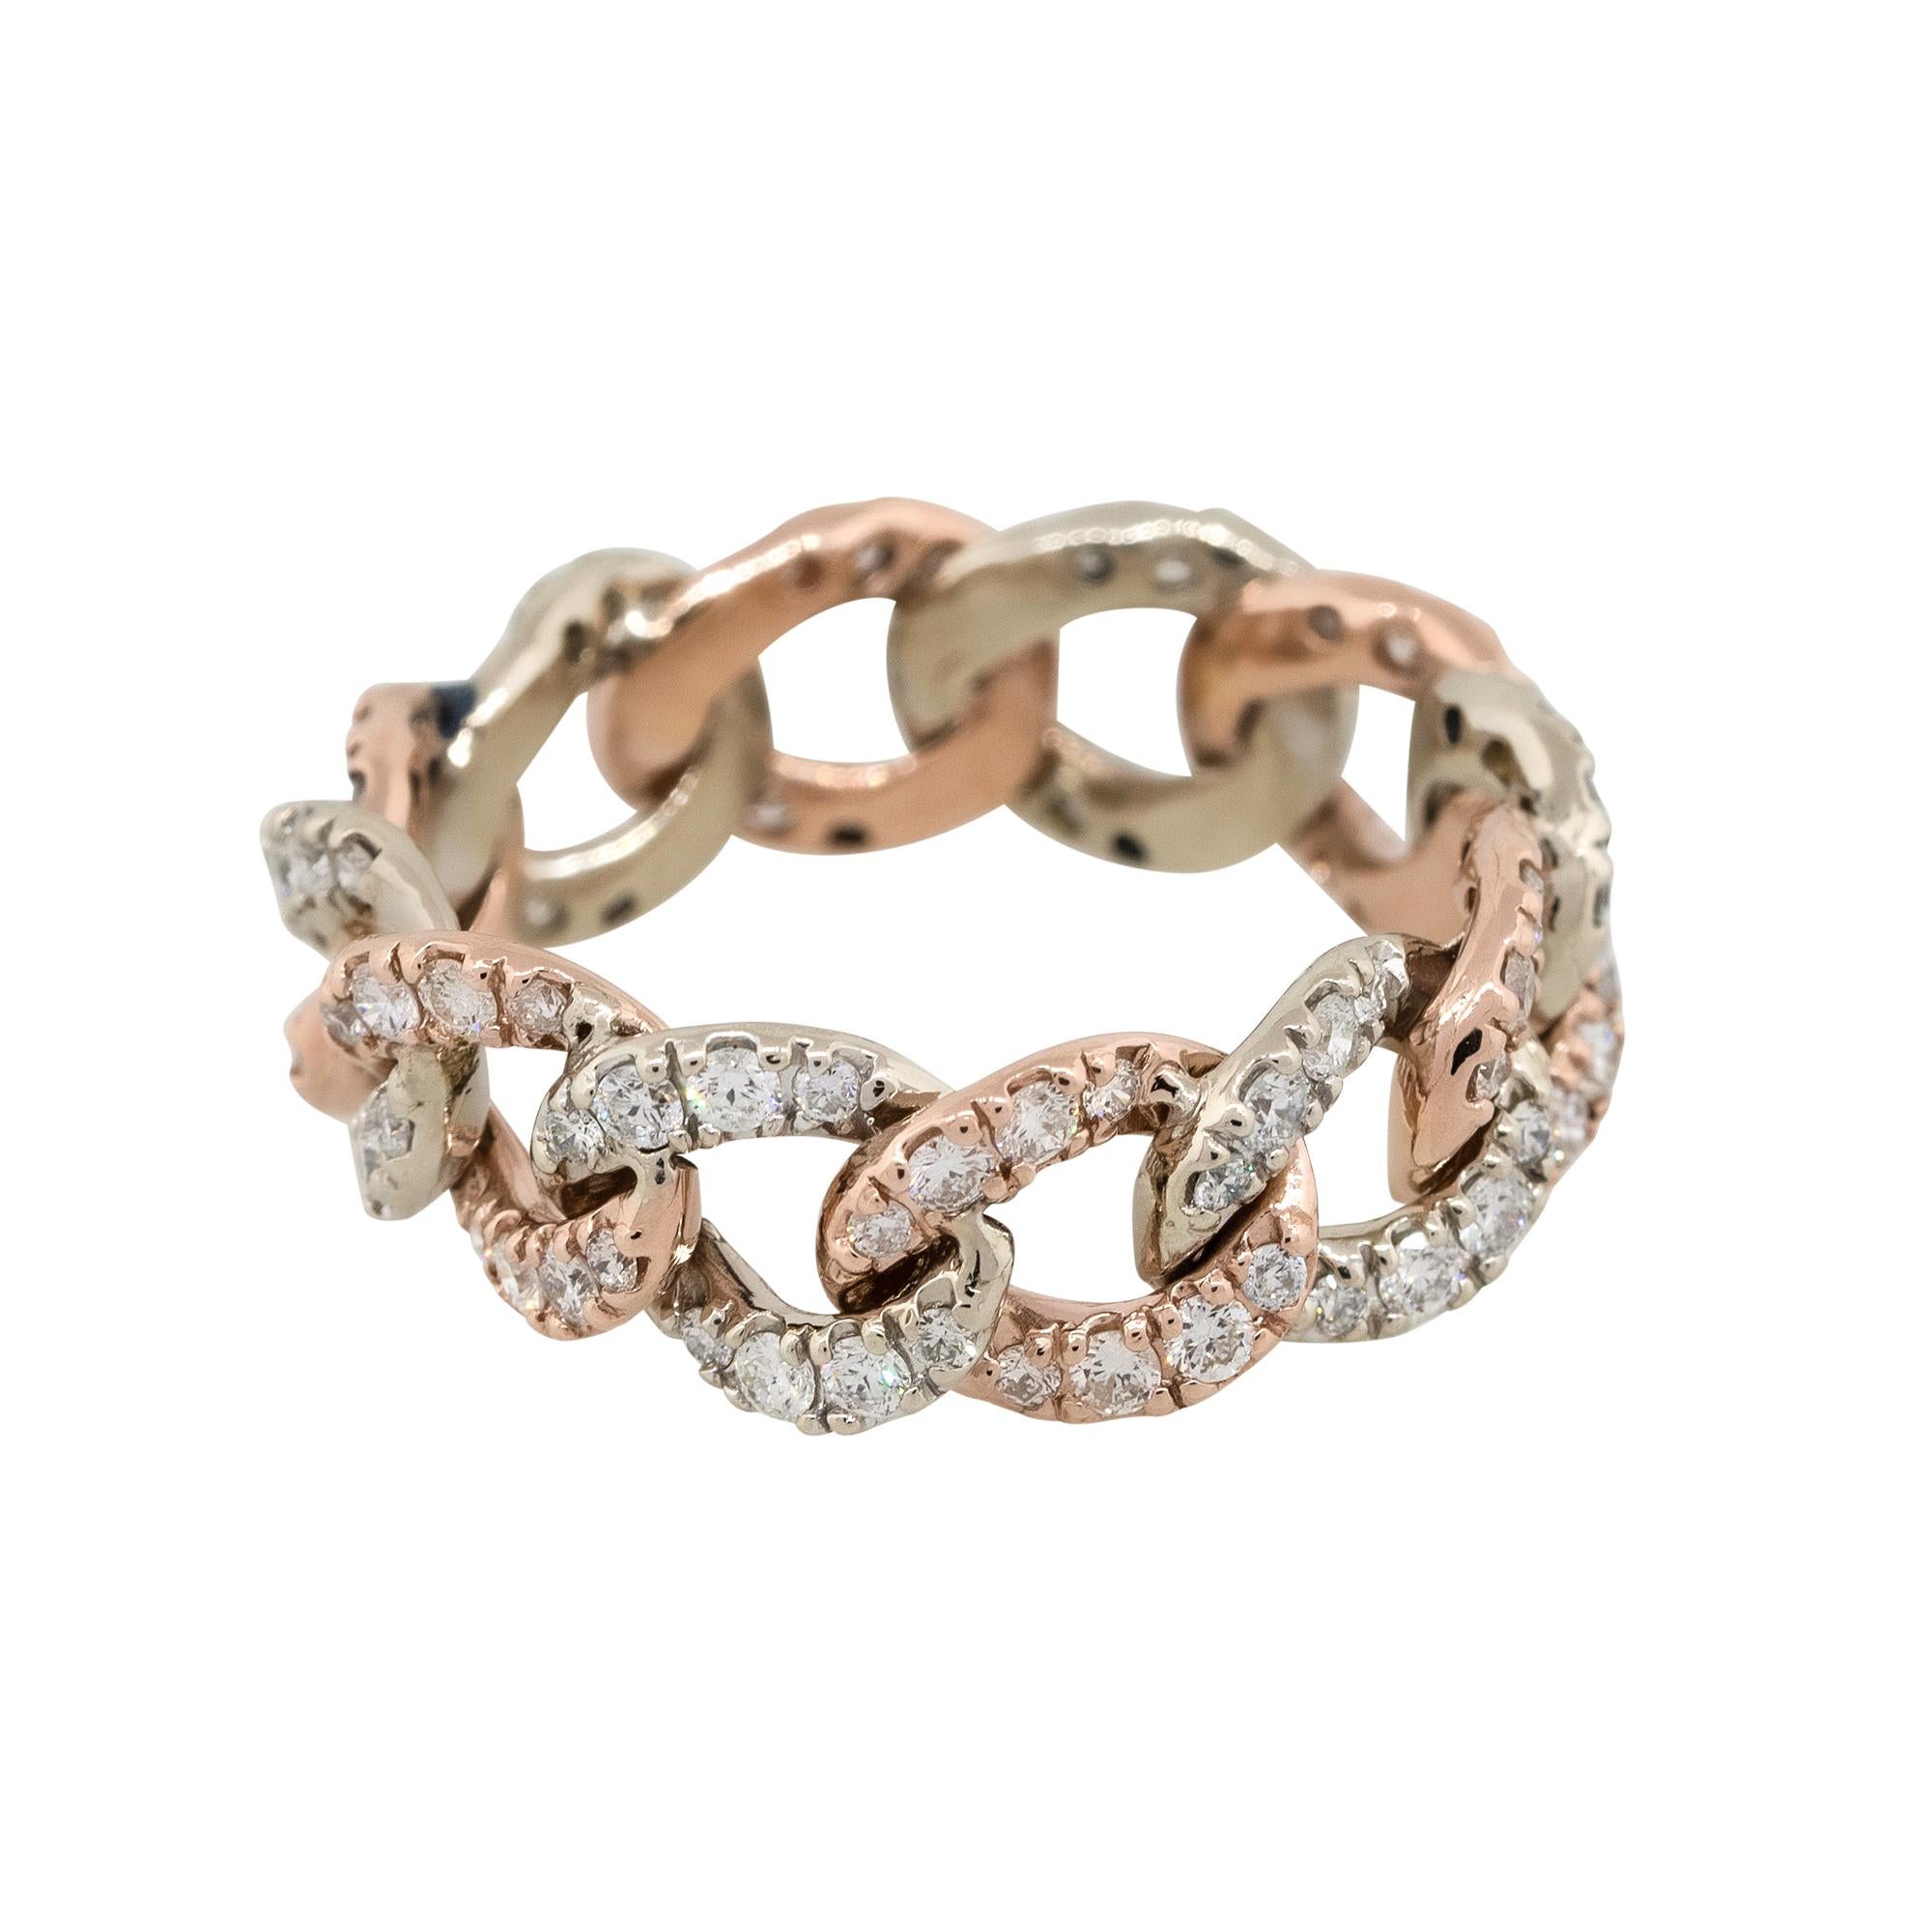 Material: 14k white & rose gold
Diamond Details: Approx. 2ctw of round cut Diamonds. Diamonds are G/H in color and VS in clarity
Ring Size: 10.75 
Ring Measurements: 25mm x 8mm x 25mm
Total Weight: 7.4g (4.7dwt)
Additional Details: This item comes